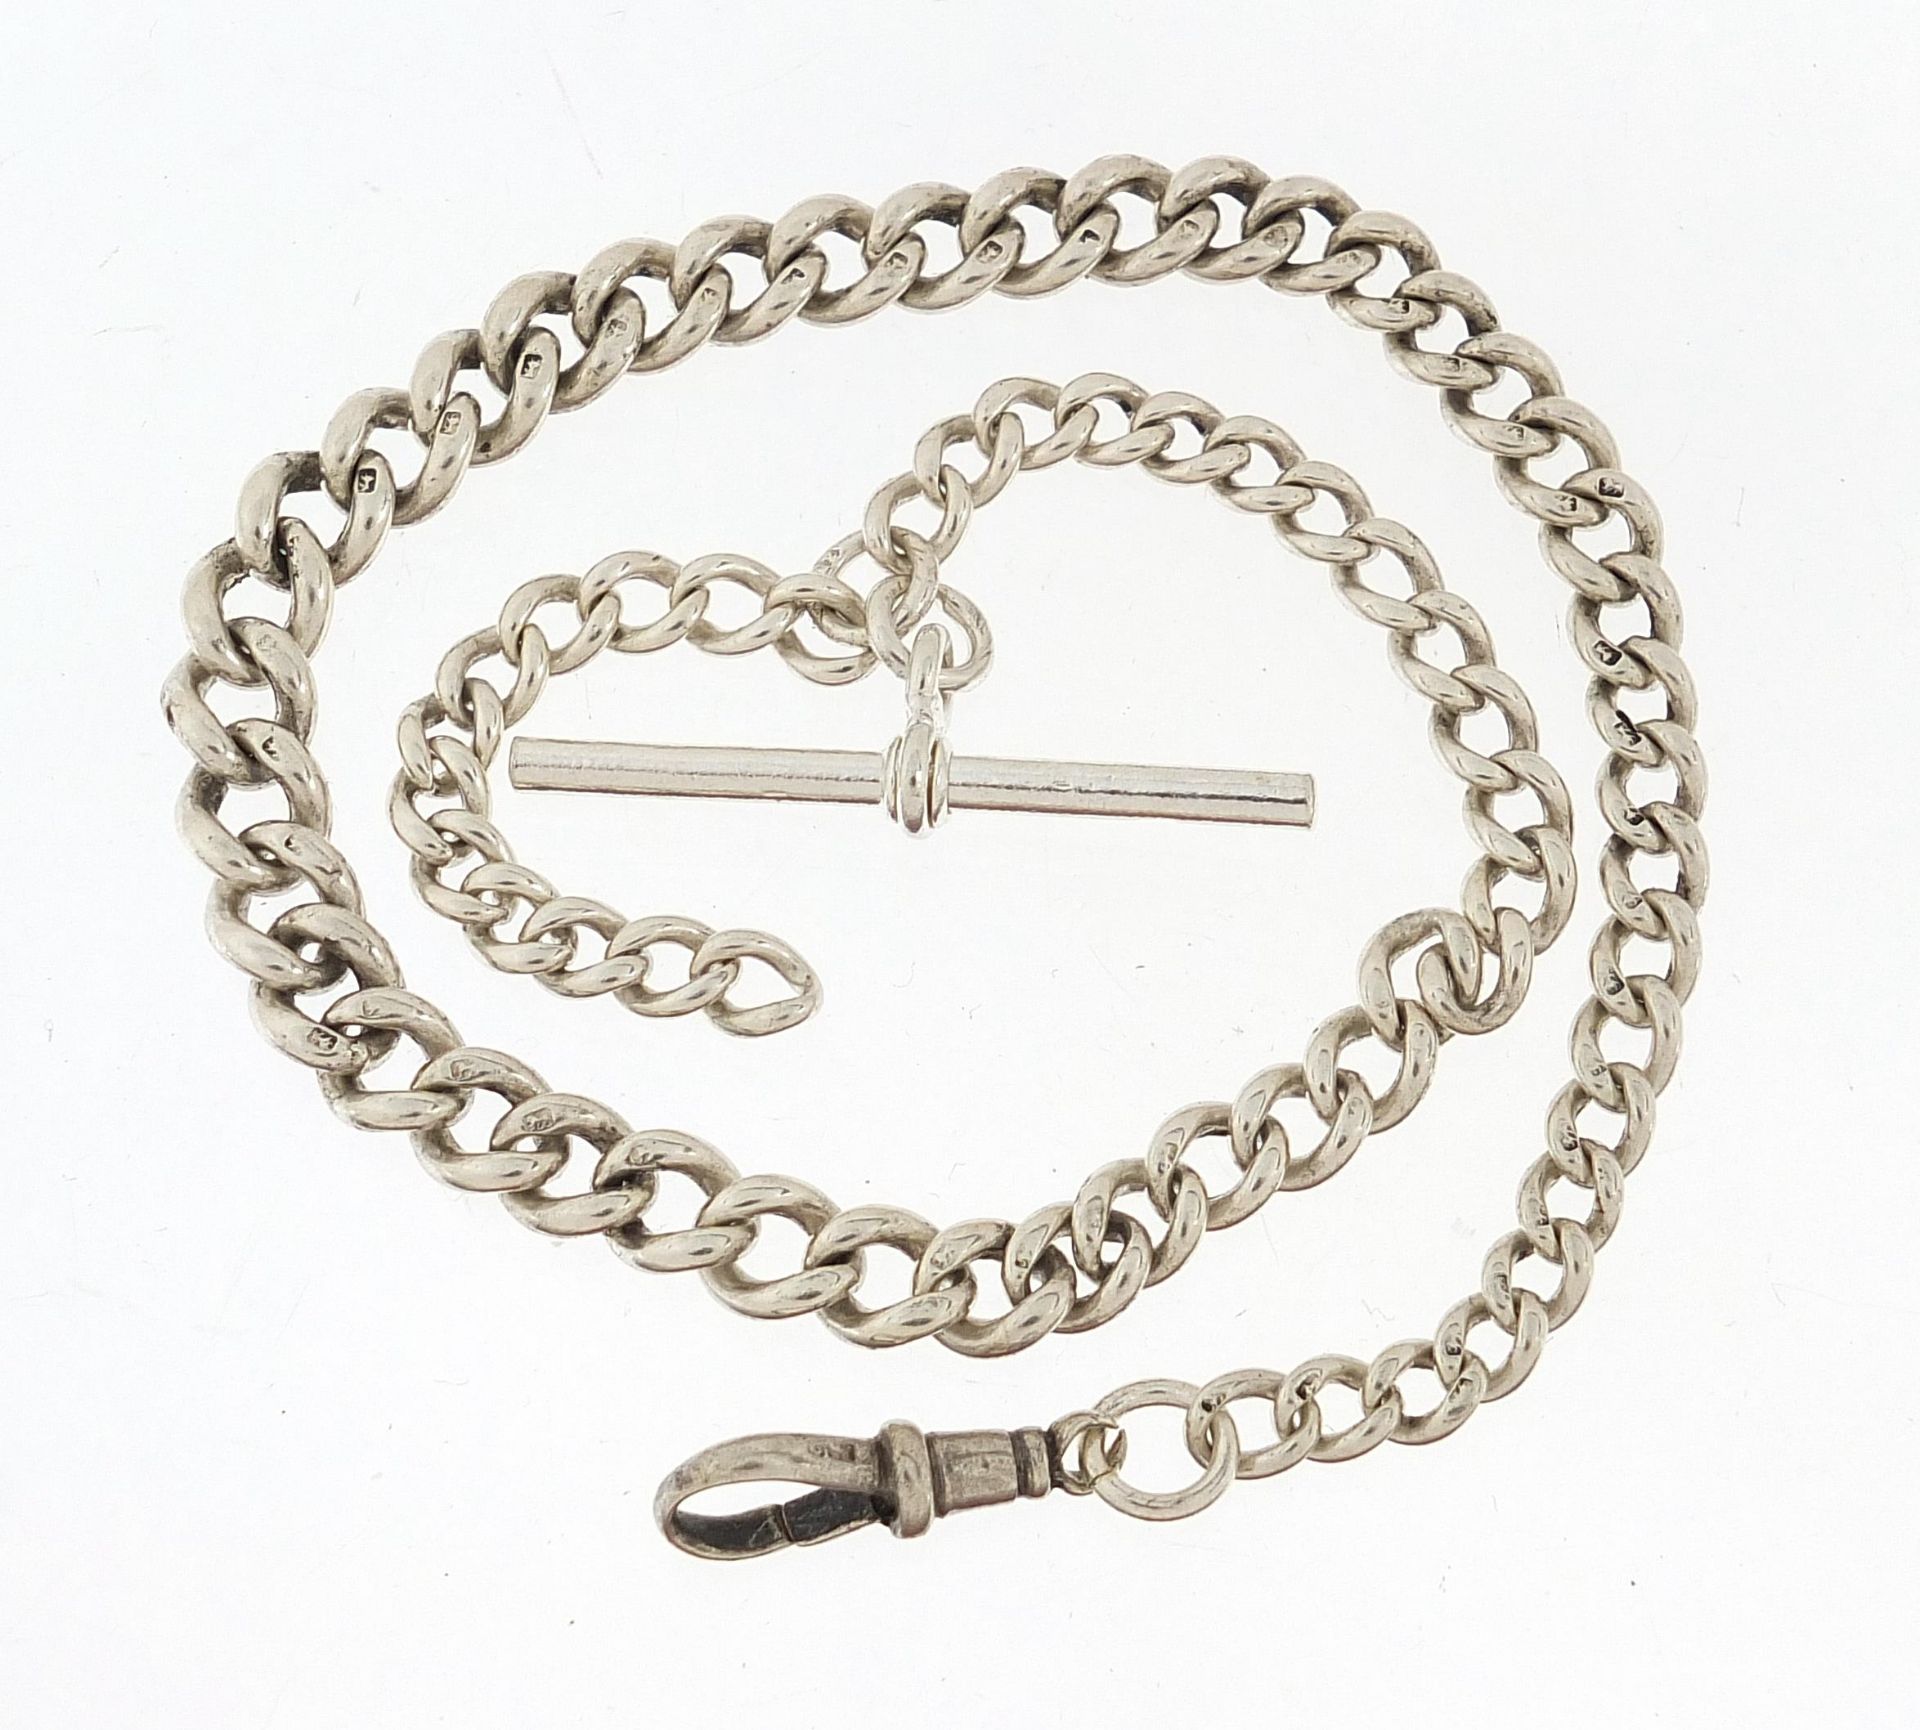 Graduated silver watch chain with T bar, 39cm in length, 40.4g - Image 2 of 2